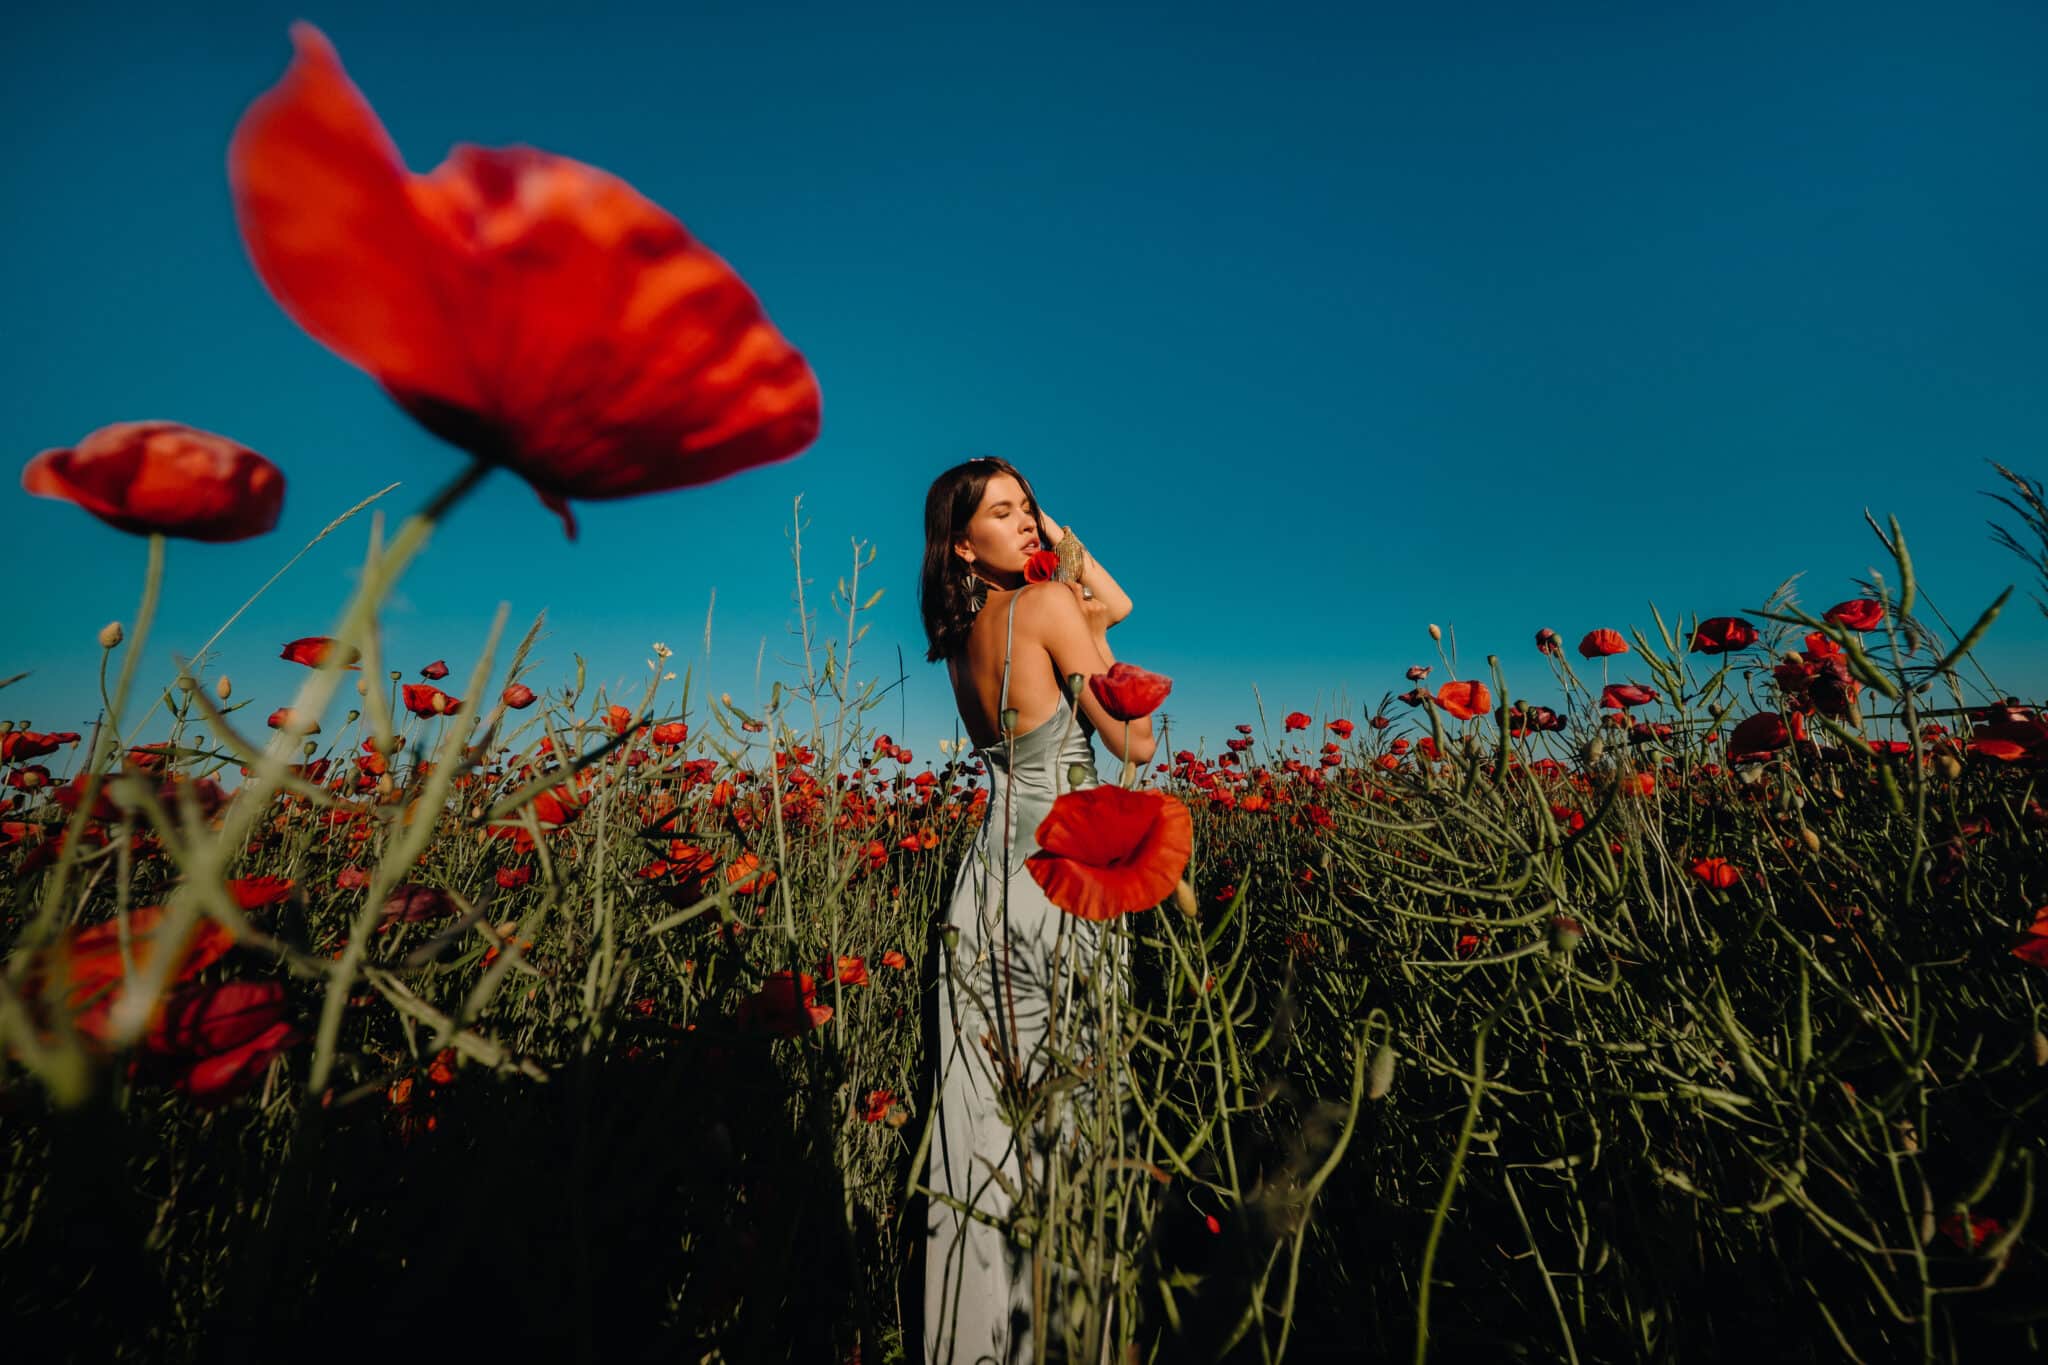 a girl in a dress on a poppy field at sunset